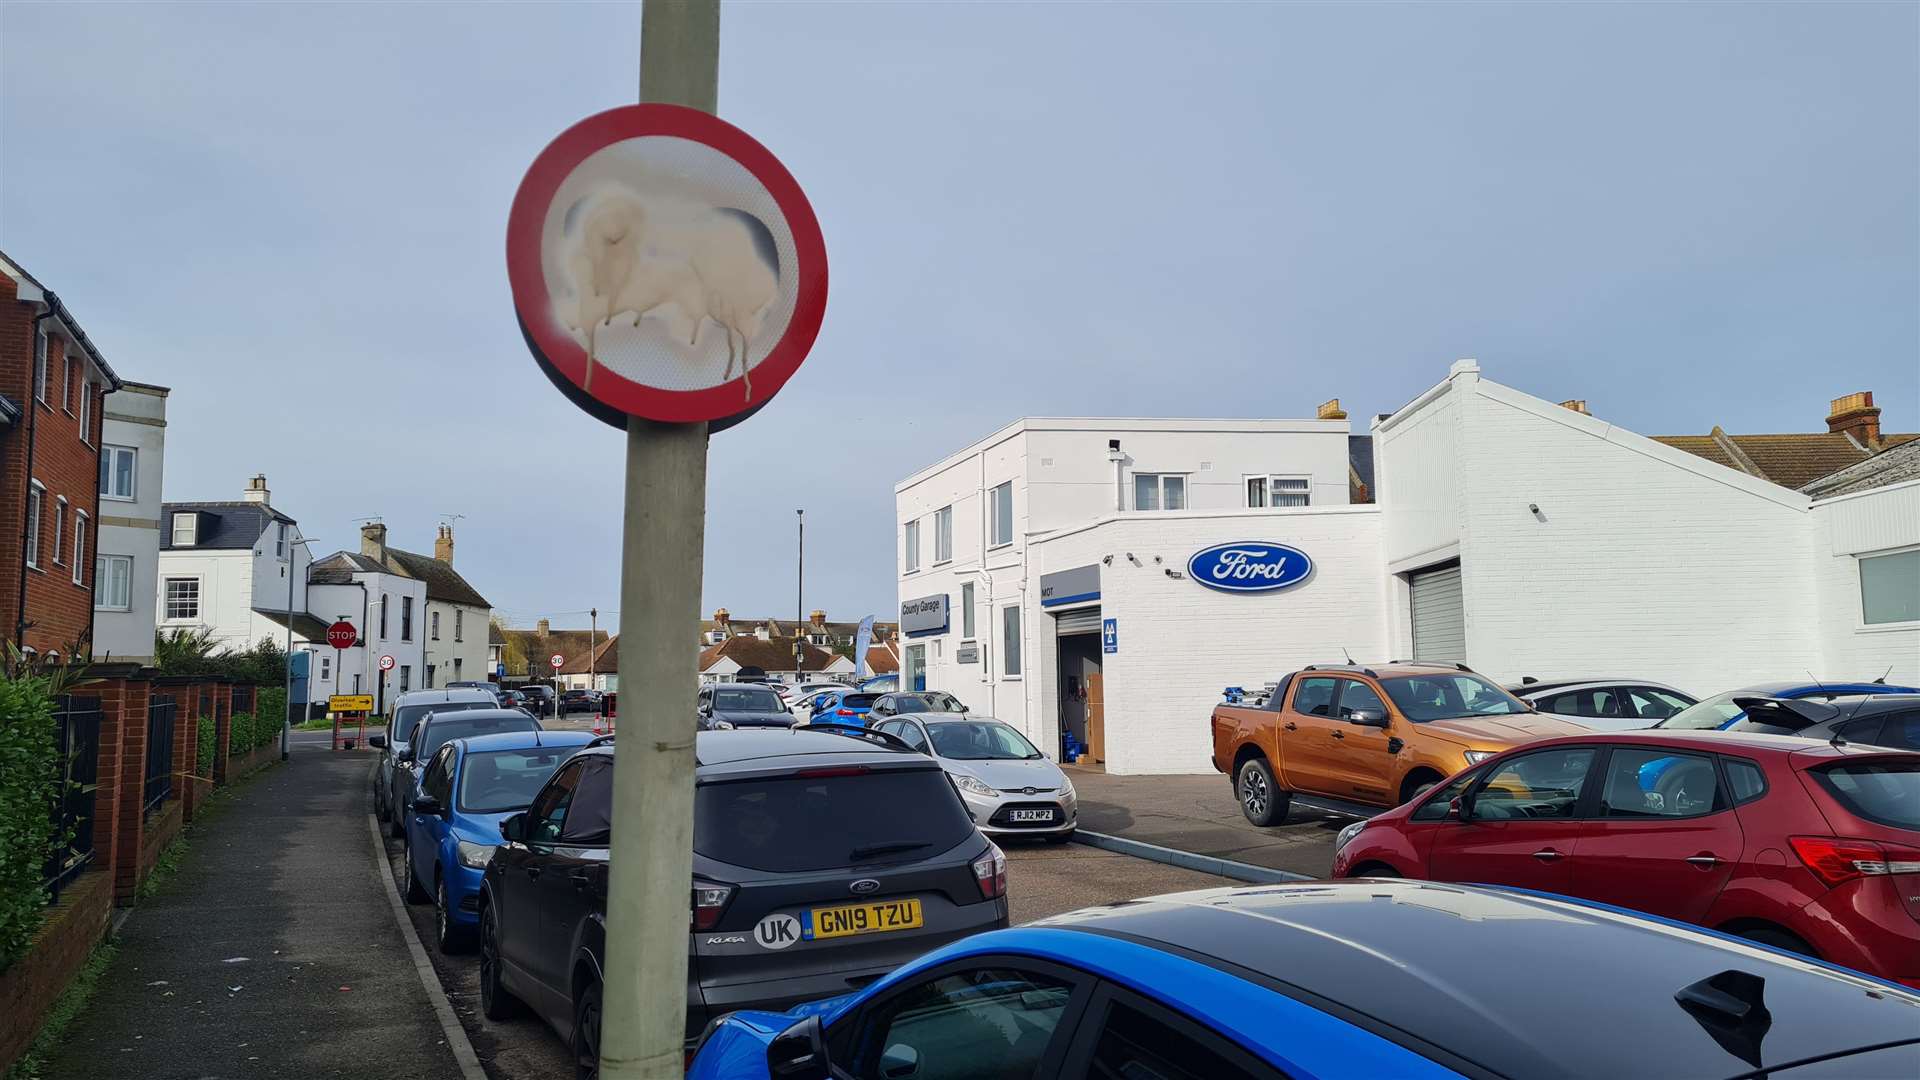 One of the many new 20mph signs vandalised in Herne Bay